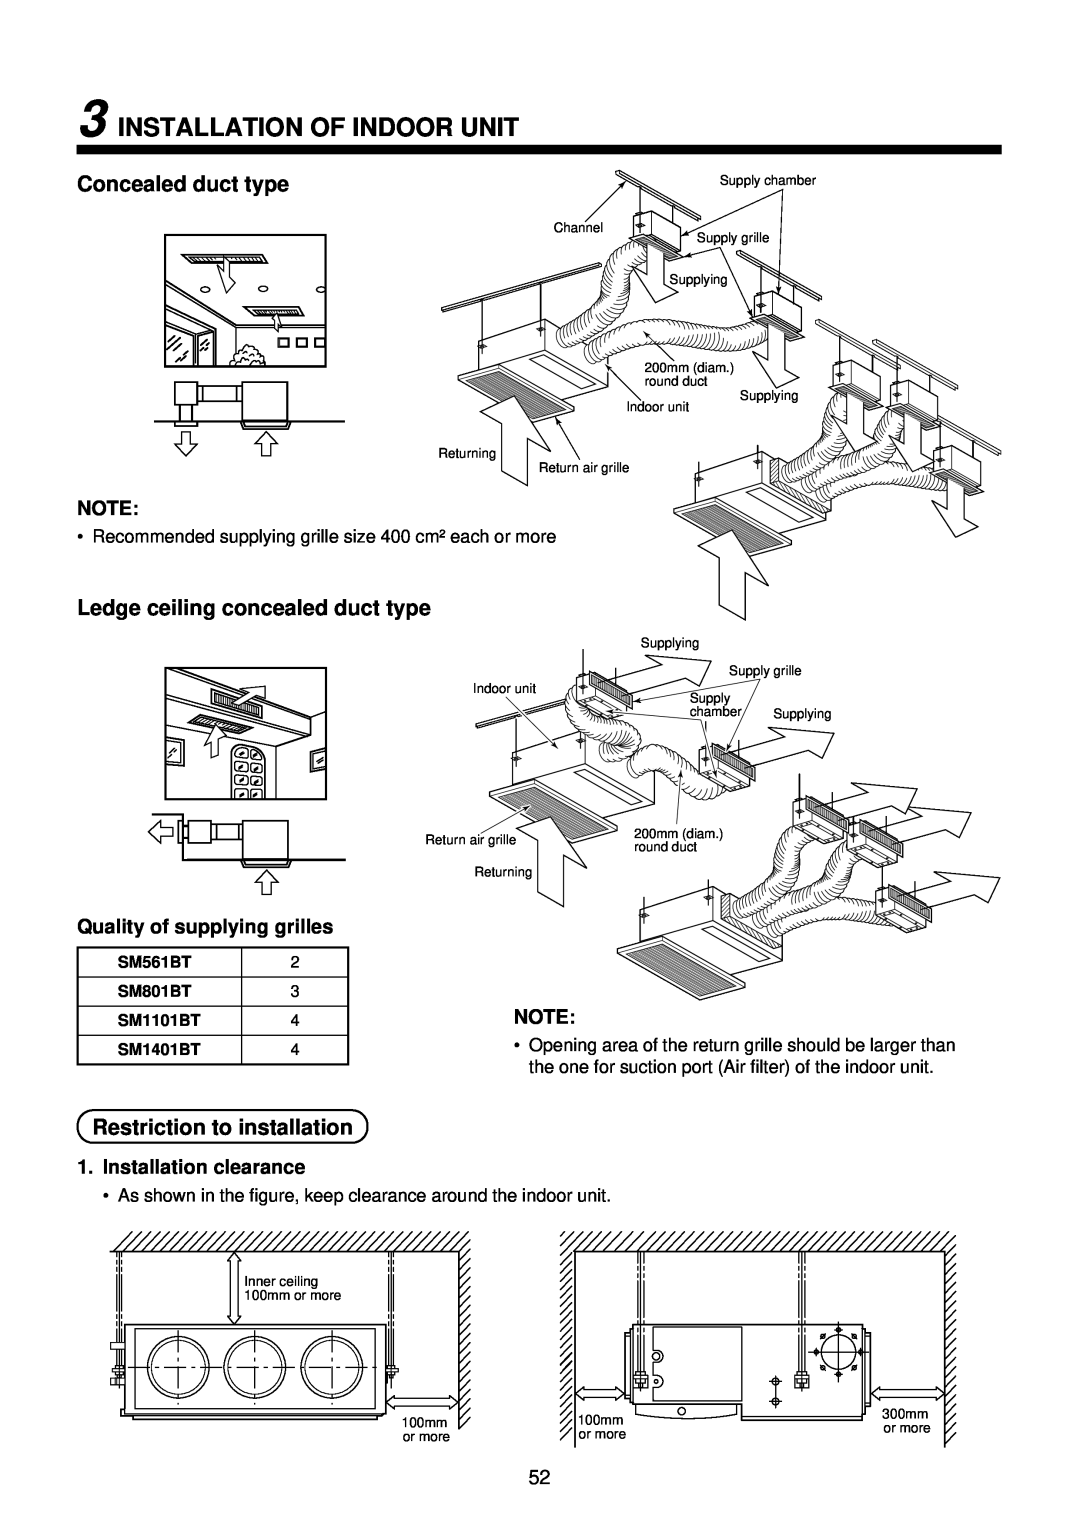 Toshiba R410A Concealed duct type, Ledge ceiling concealed duct type, Restriction to installation, Installation clearance 